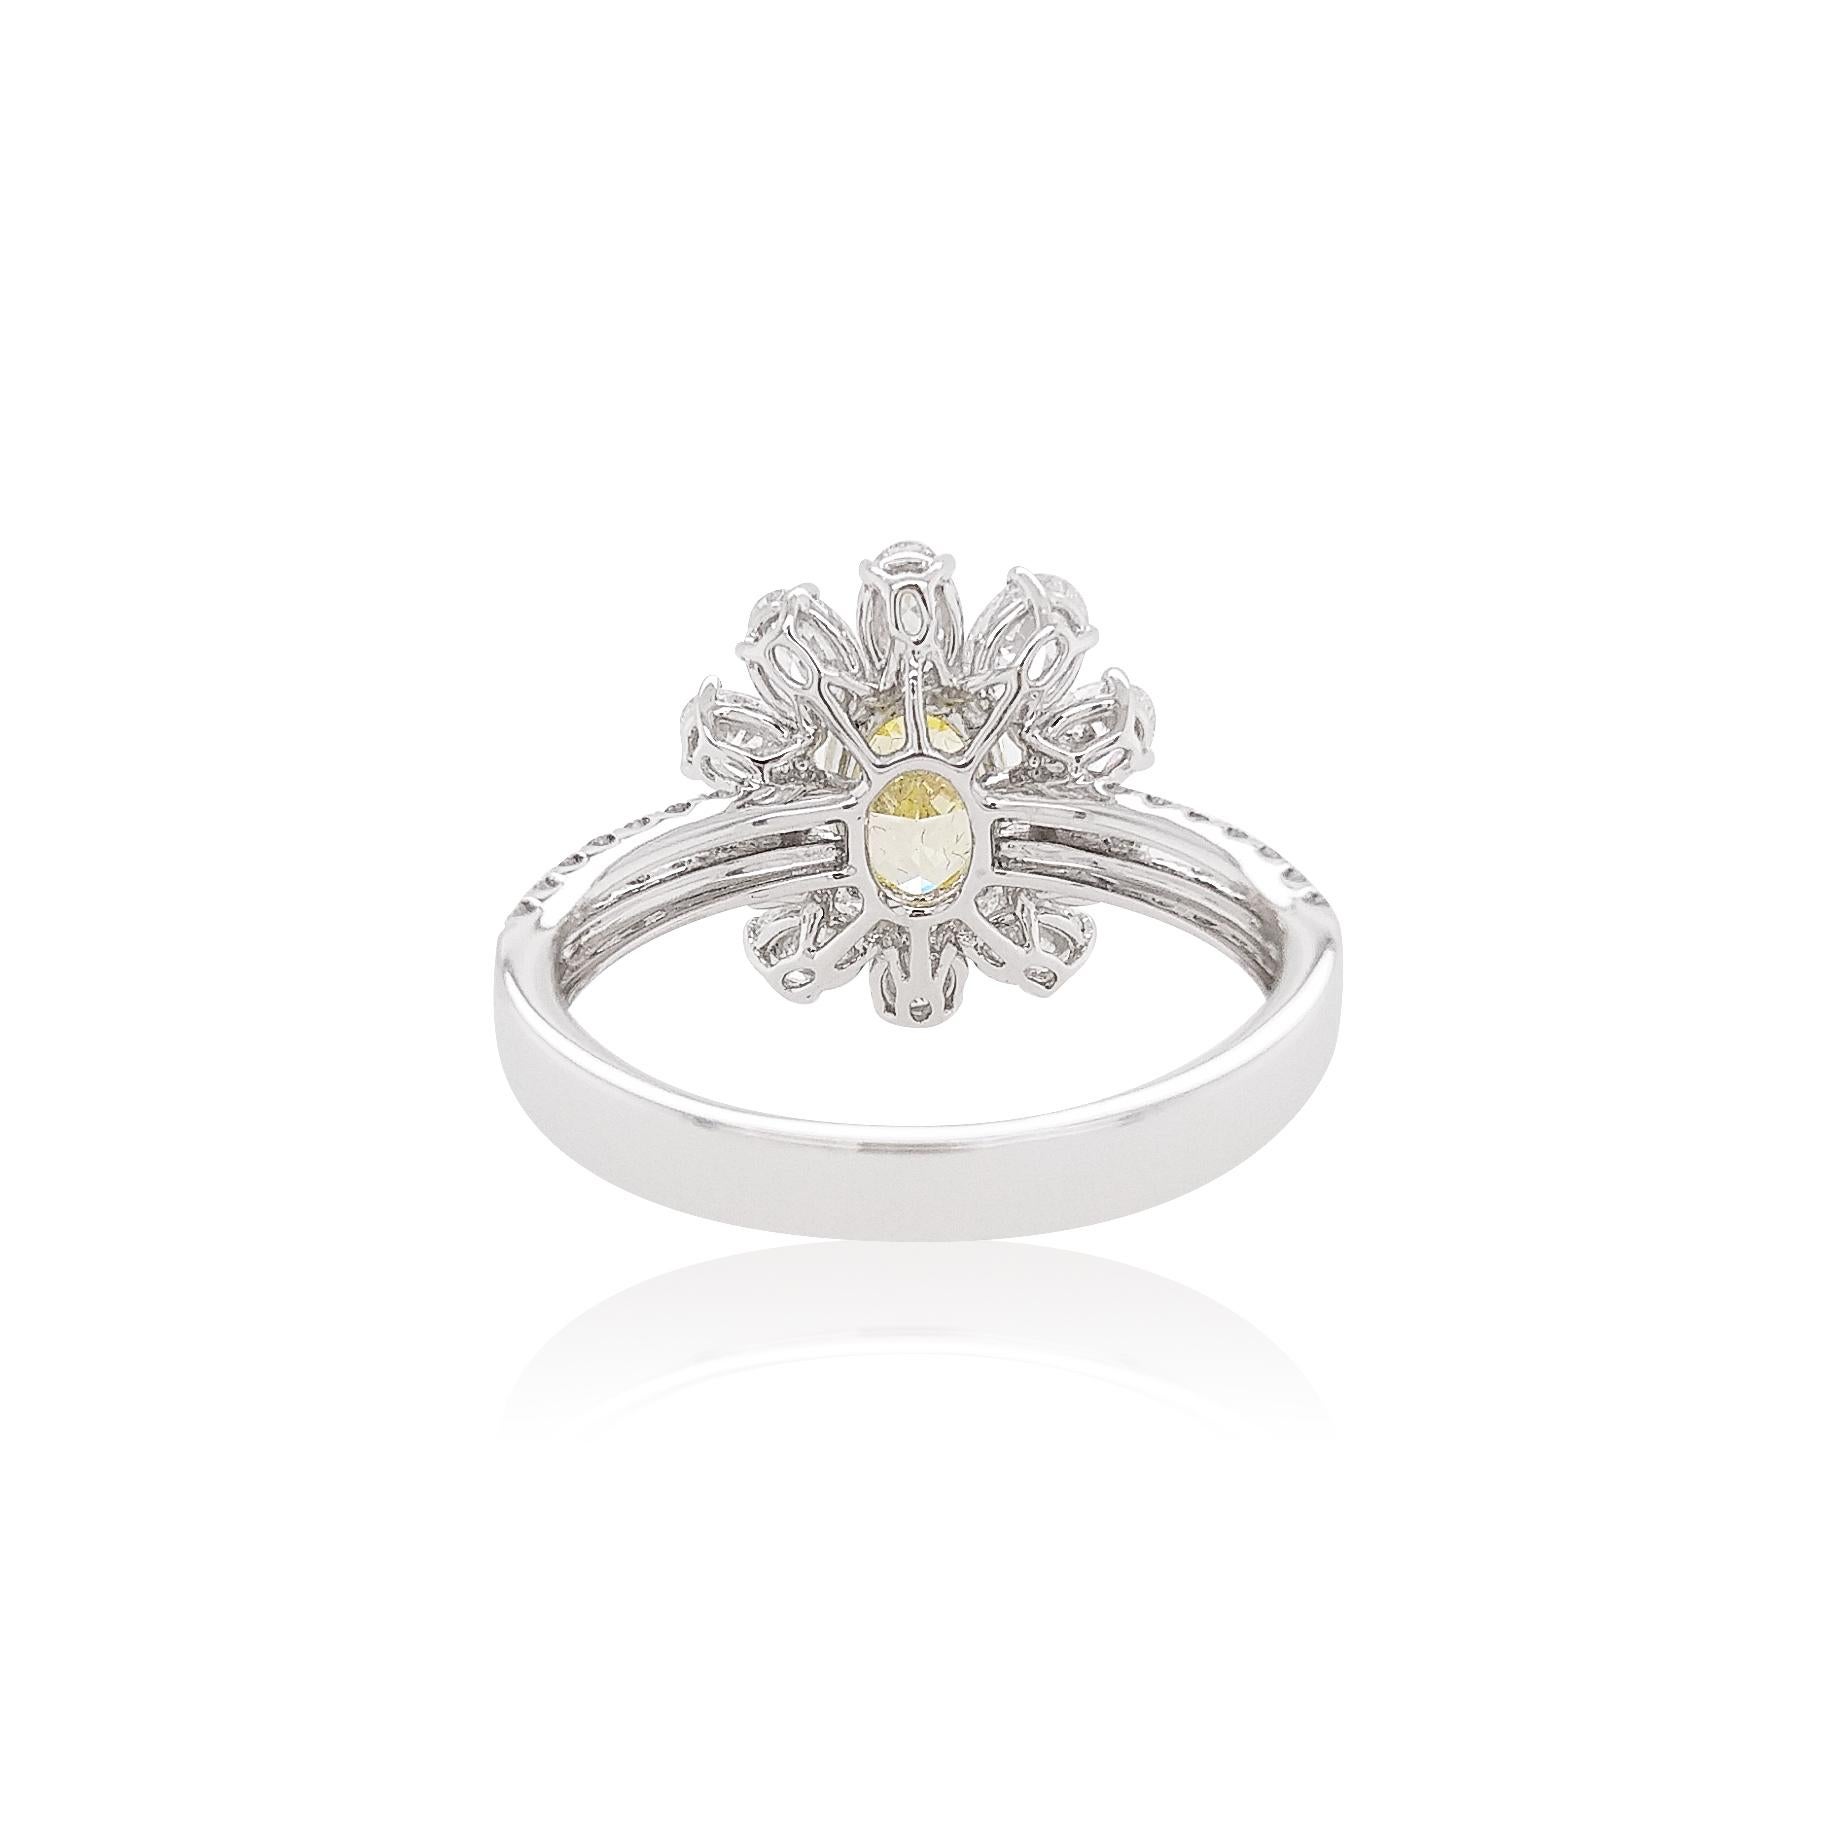 This enchanting ring features a lustrous Fancy Intense Yellow Diamond at its centre, with delicate oval shape white diamonds halo surrounding it. Set in Platinum to enrich the spectacular hues of the Yellow Diamond and the sparkle of the White